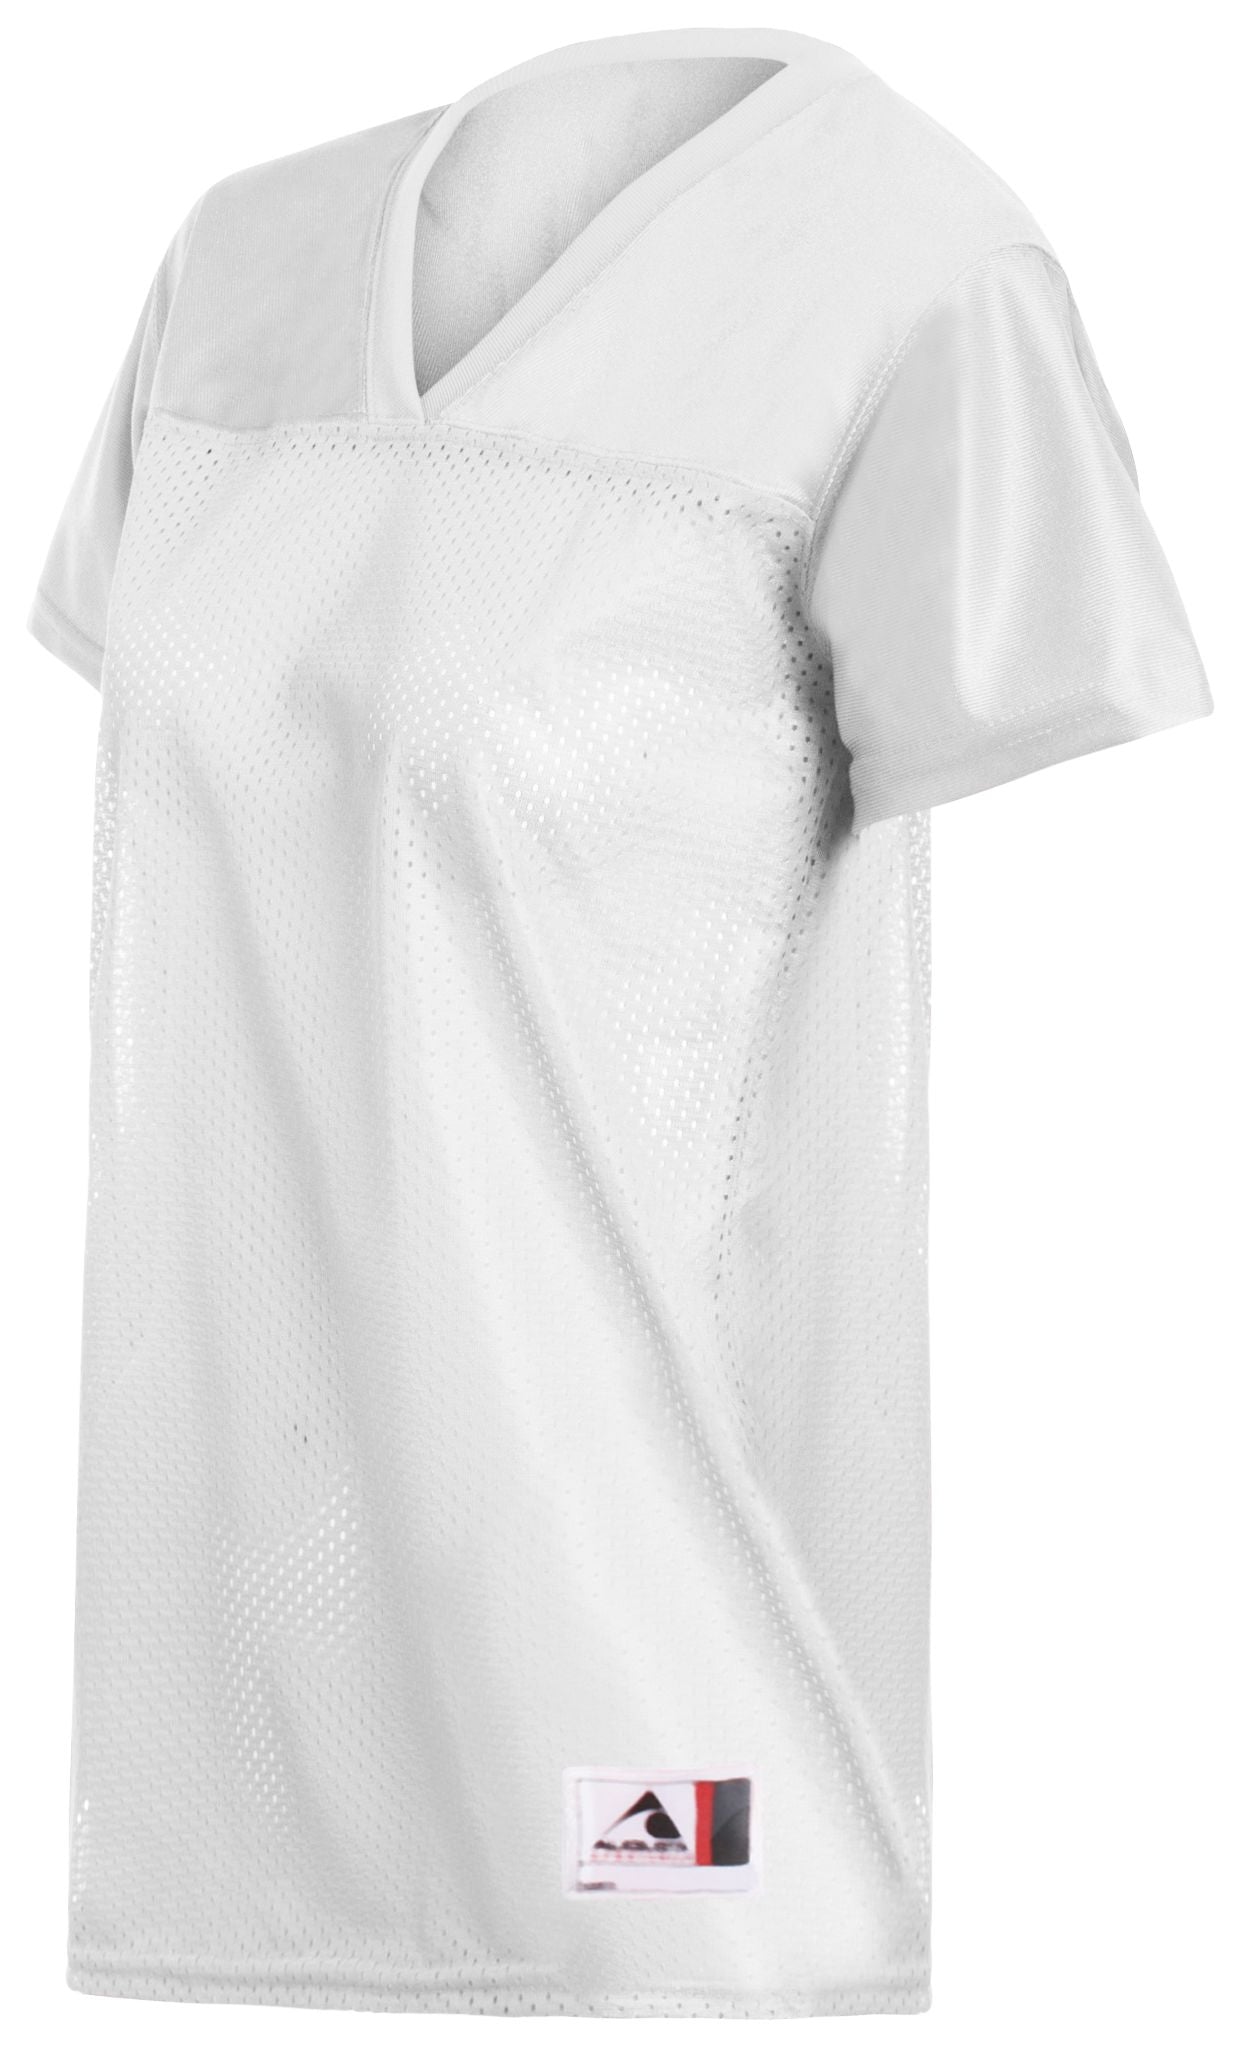 Augusta Sportswear Ladies Replica Football Tee in White  -Part of the Ladies, Ladies-Jersey, Augusta-Products, Football, Shirts, All-Sports, All-Sports-1 product lines at KanaleyCreations.com